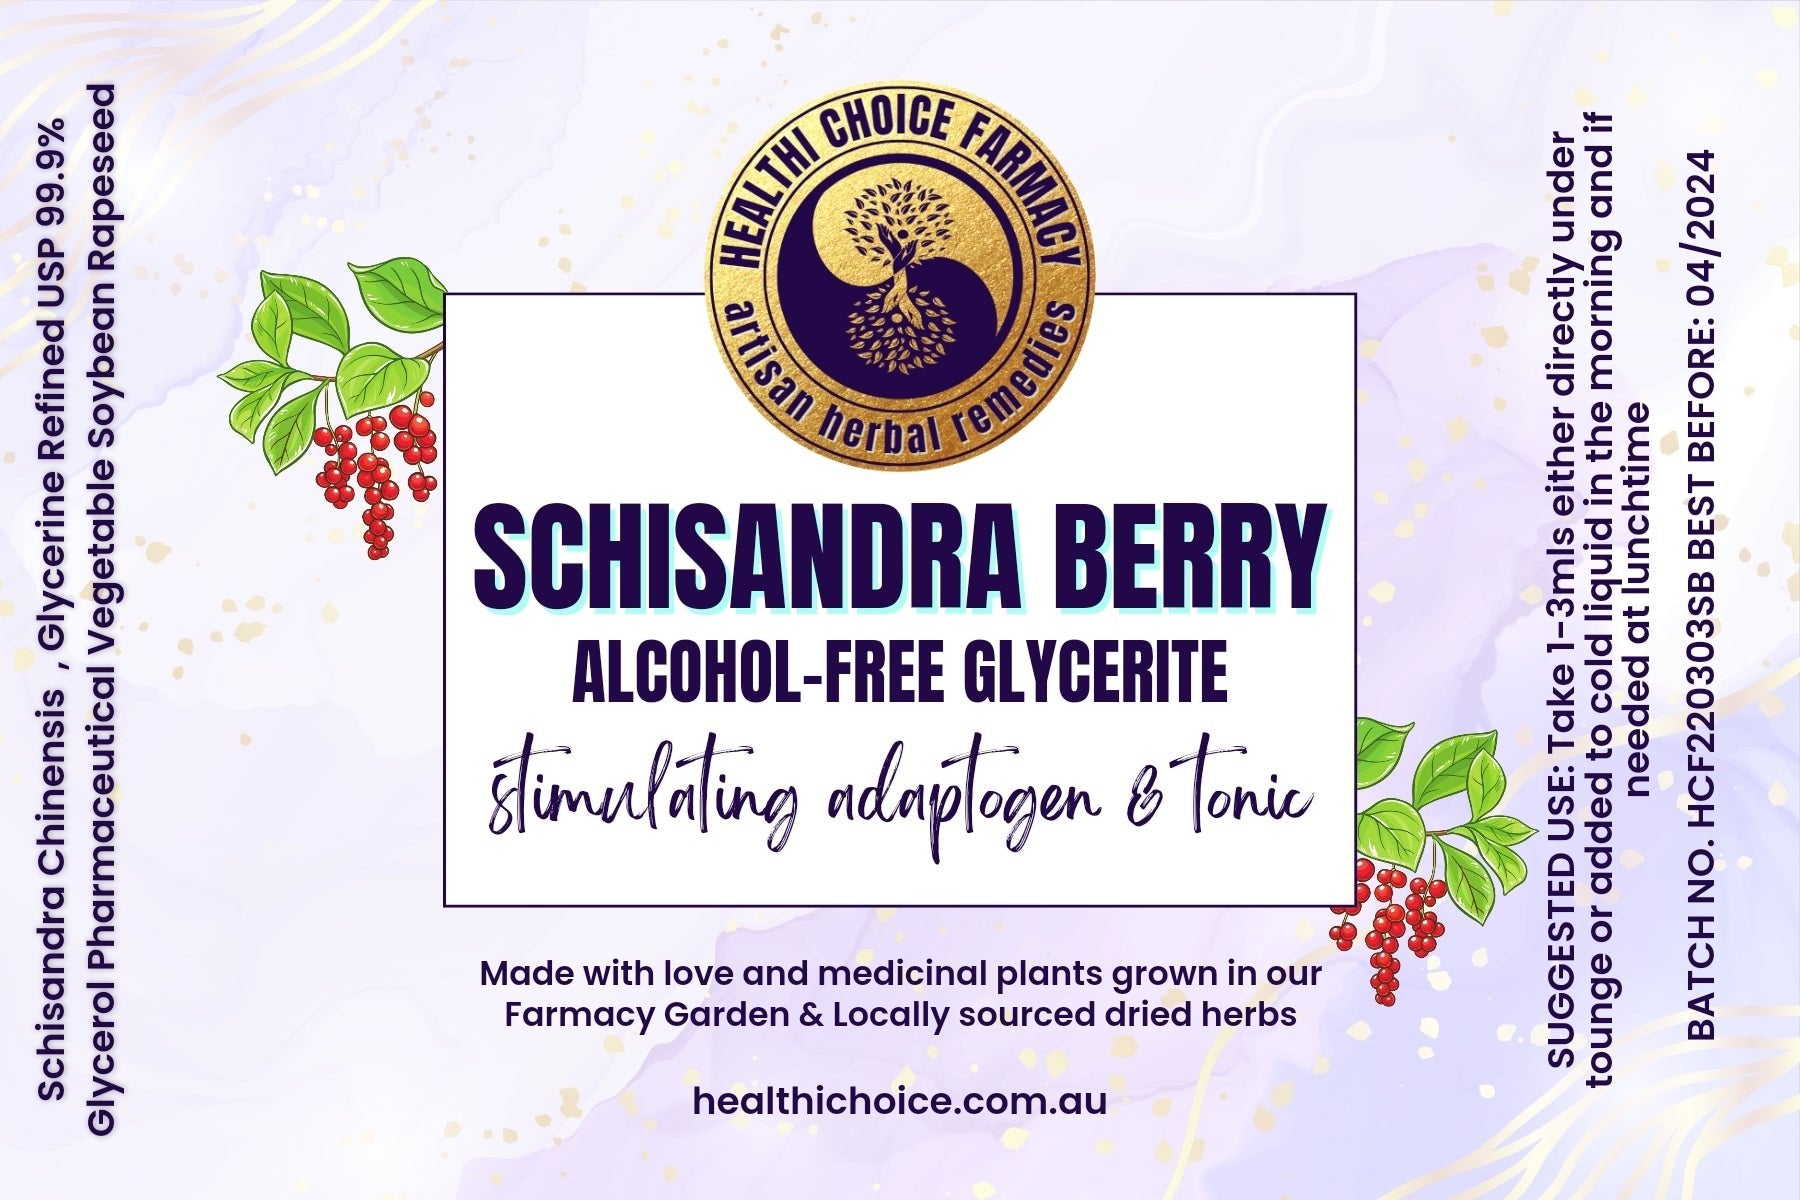 Schisandra Berry Alcohol-Free Liquid Extract, Organic Schisandra (Schisandra Chinensis) Dried Berry Glycerite Natural Herbal Supplement - Healthi Choice Farmacy